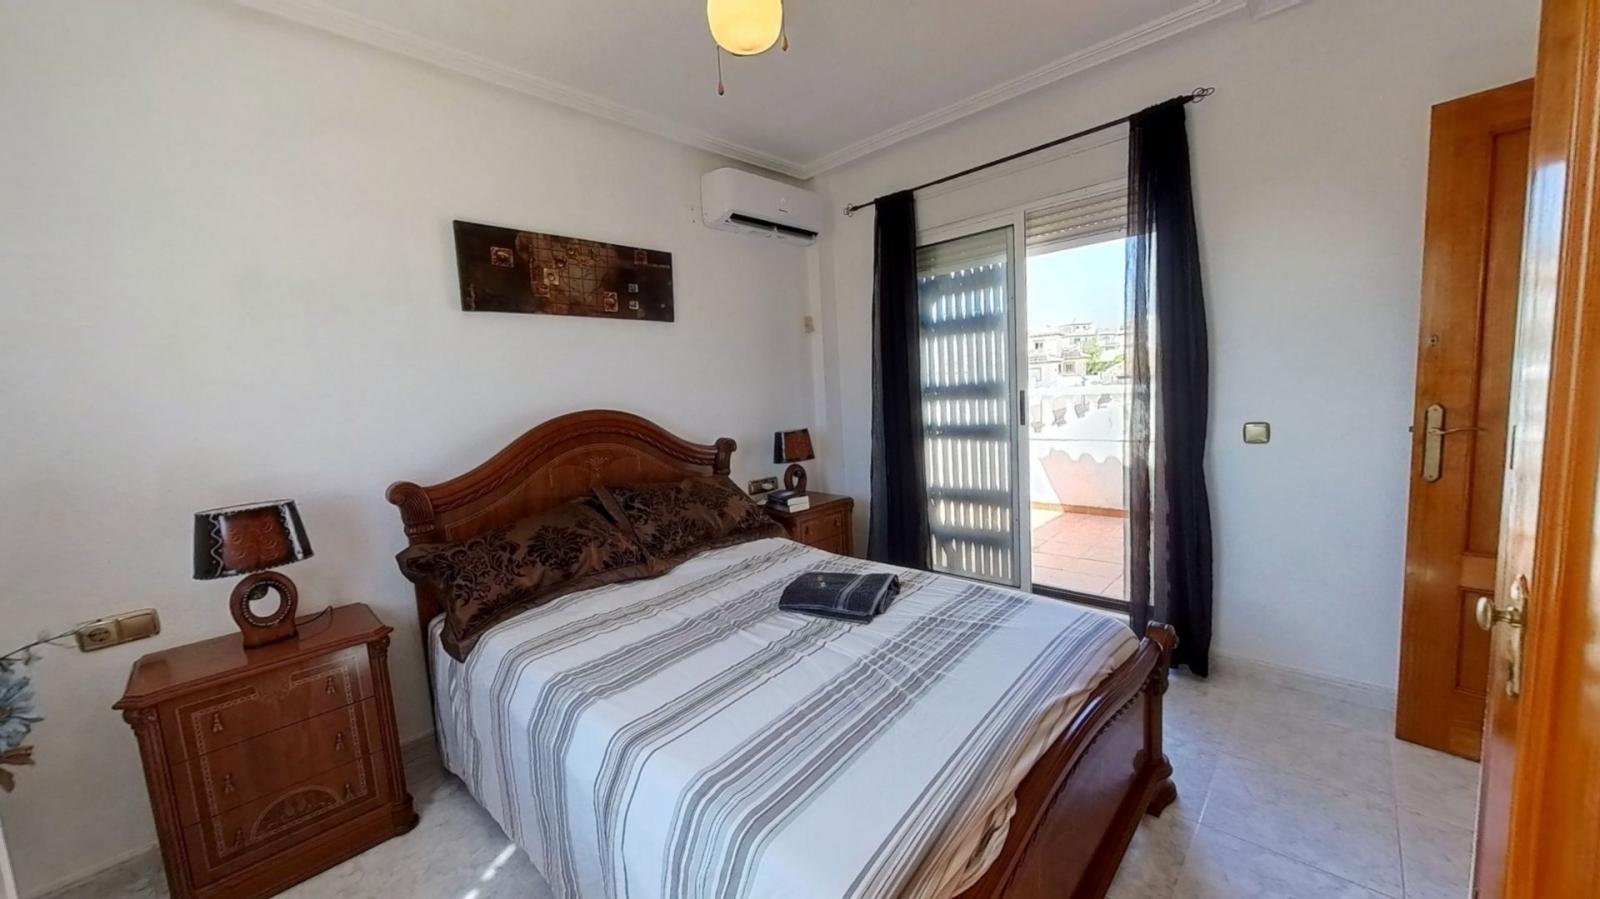 DETACHED VILLA WITH PRIVATE POOL CLOSE TO THE BEACHES AND ZENIA BOULEVARD